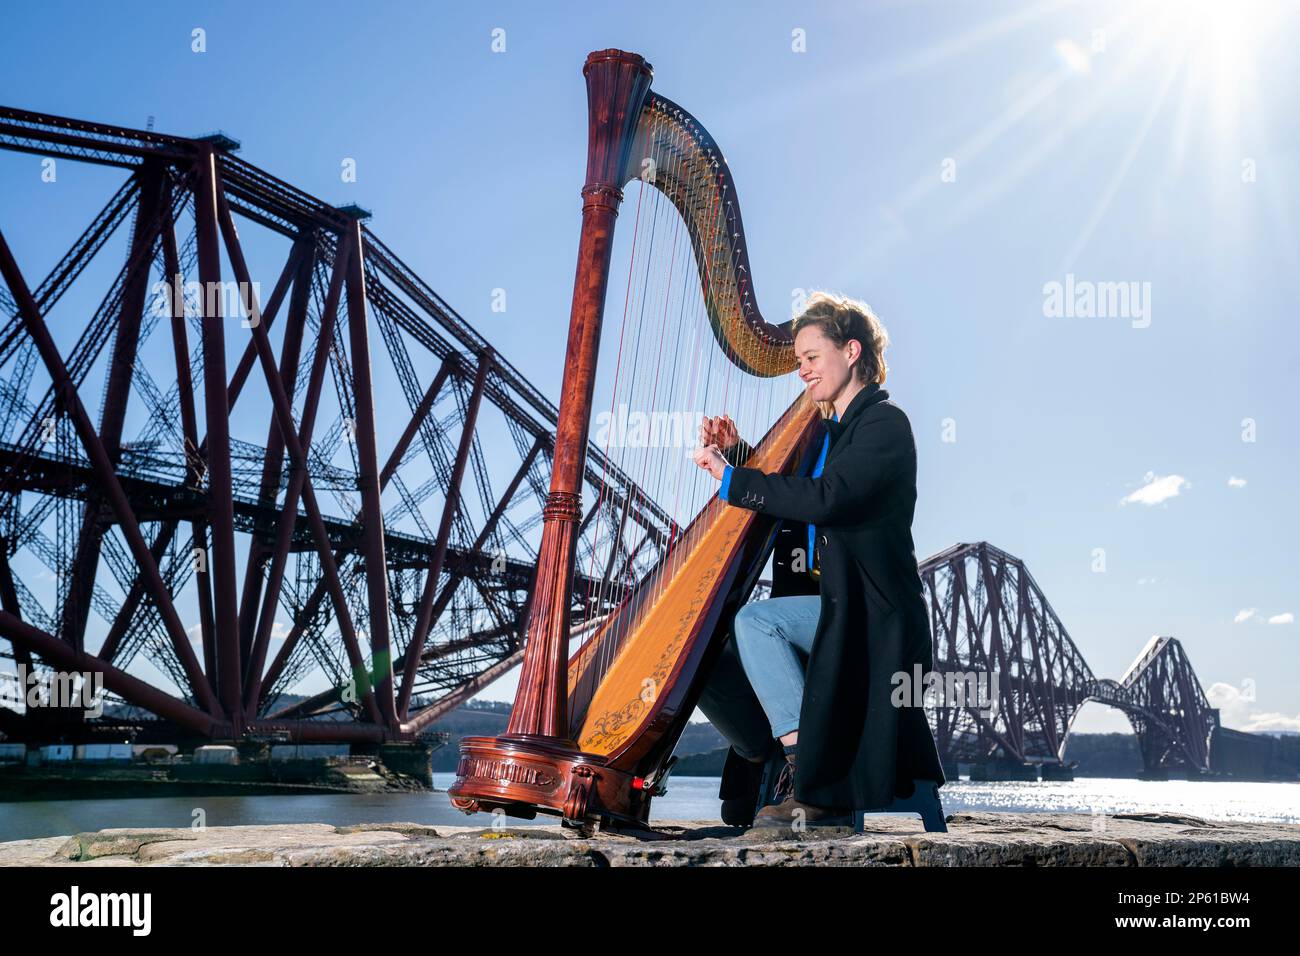 Composer, harpist and singer Esther Swift plays her Italian Salvi pedal harp during a photocall ahead of her upcoming tour, at the Forth Bridge in North Queensferry. Ms Swift will tour across Scotland solo this month with a programme of original compositions and traditional works. Picture date: Tuesday March 7, 2023. Stock Photo